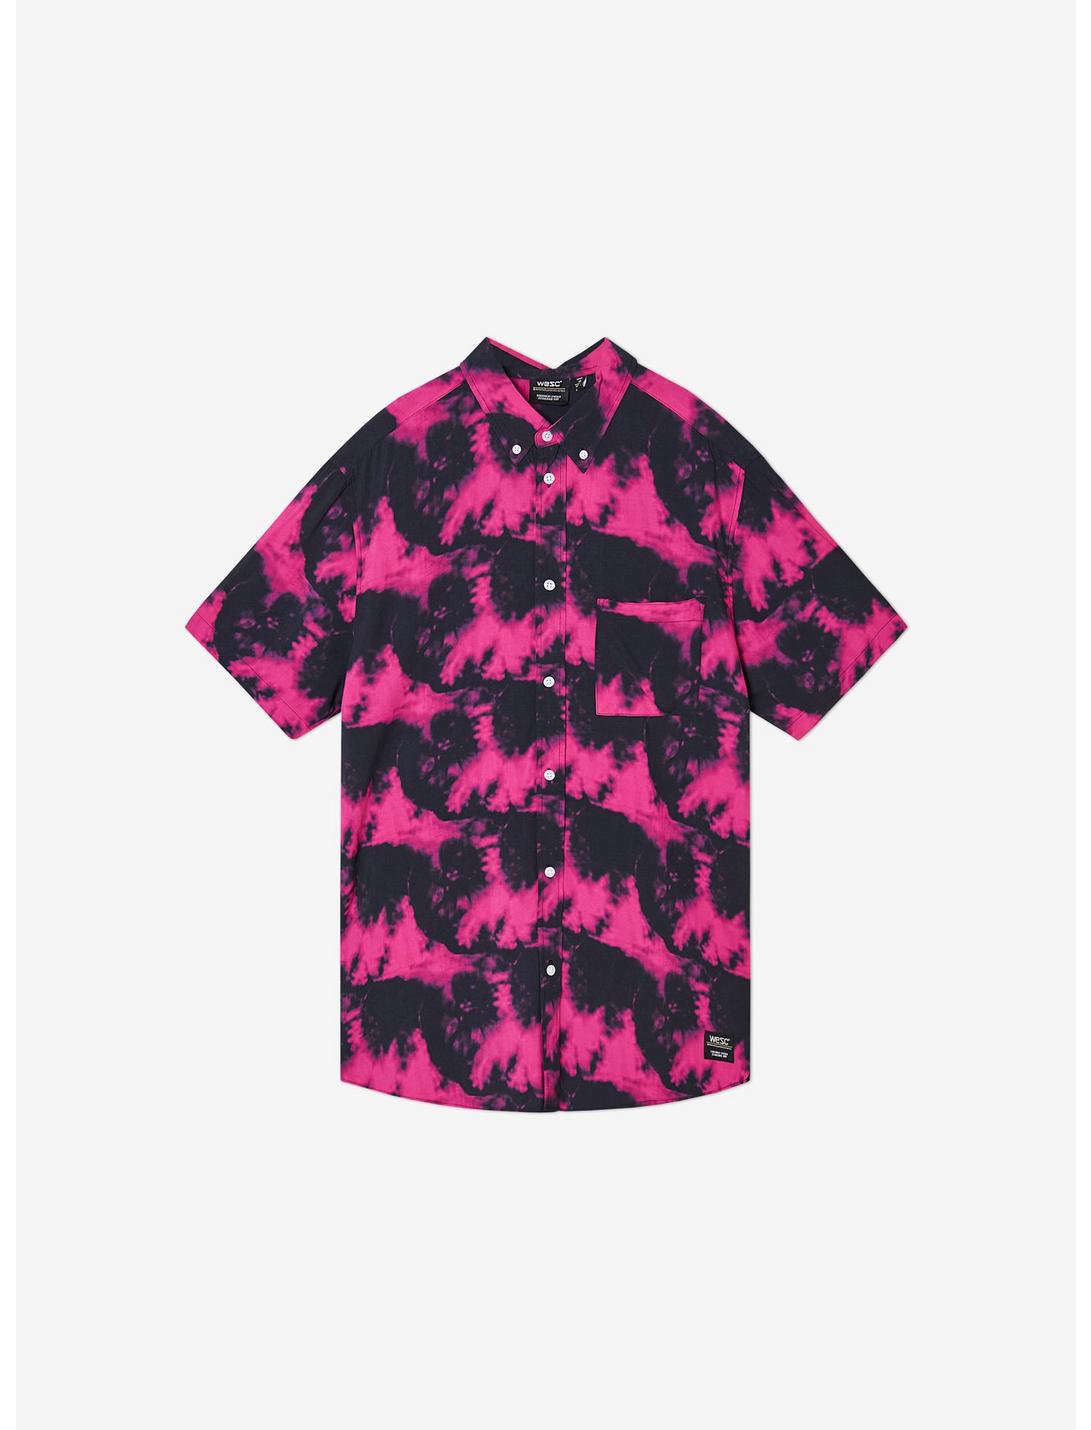 WeSC Oden Pink Tie Dye Woven Button-Up, PINK, hi-res